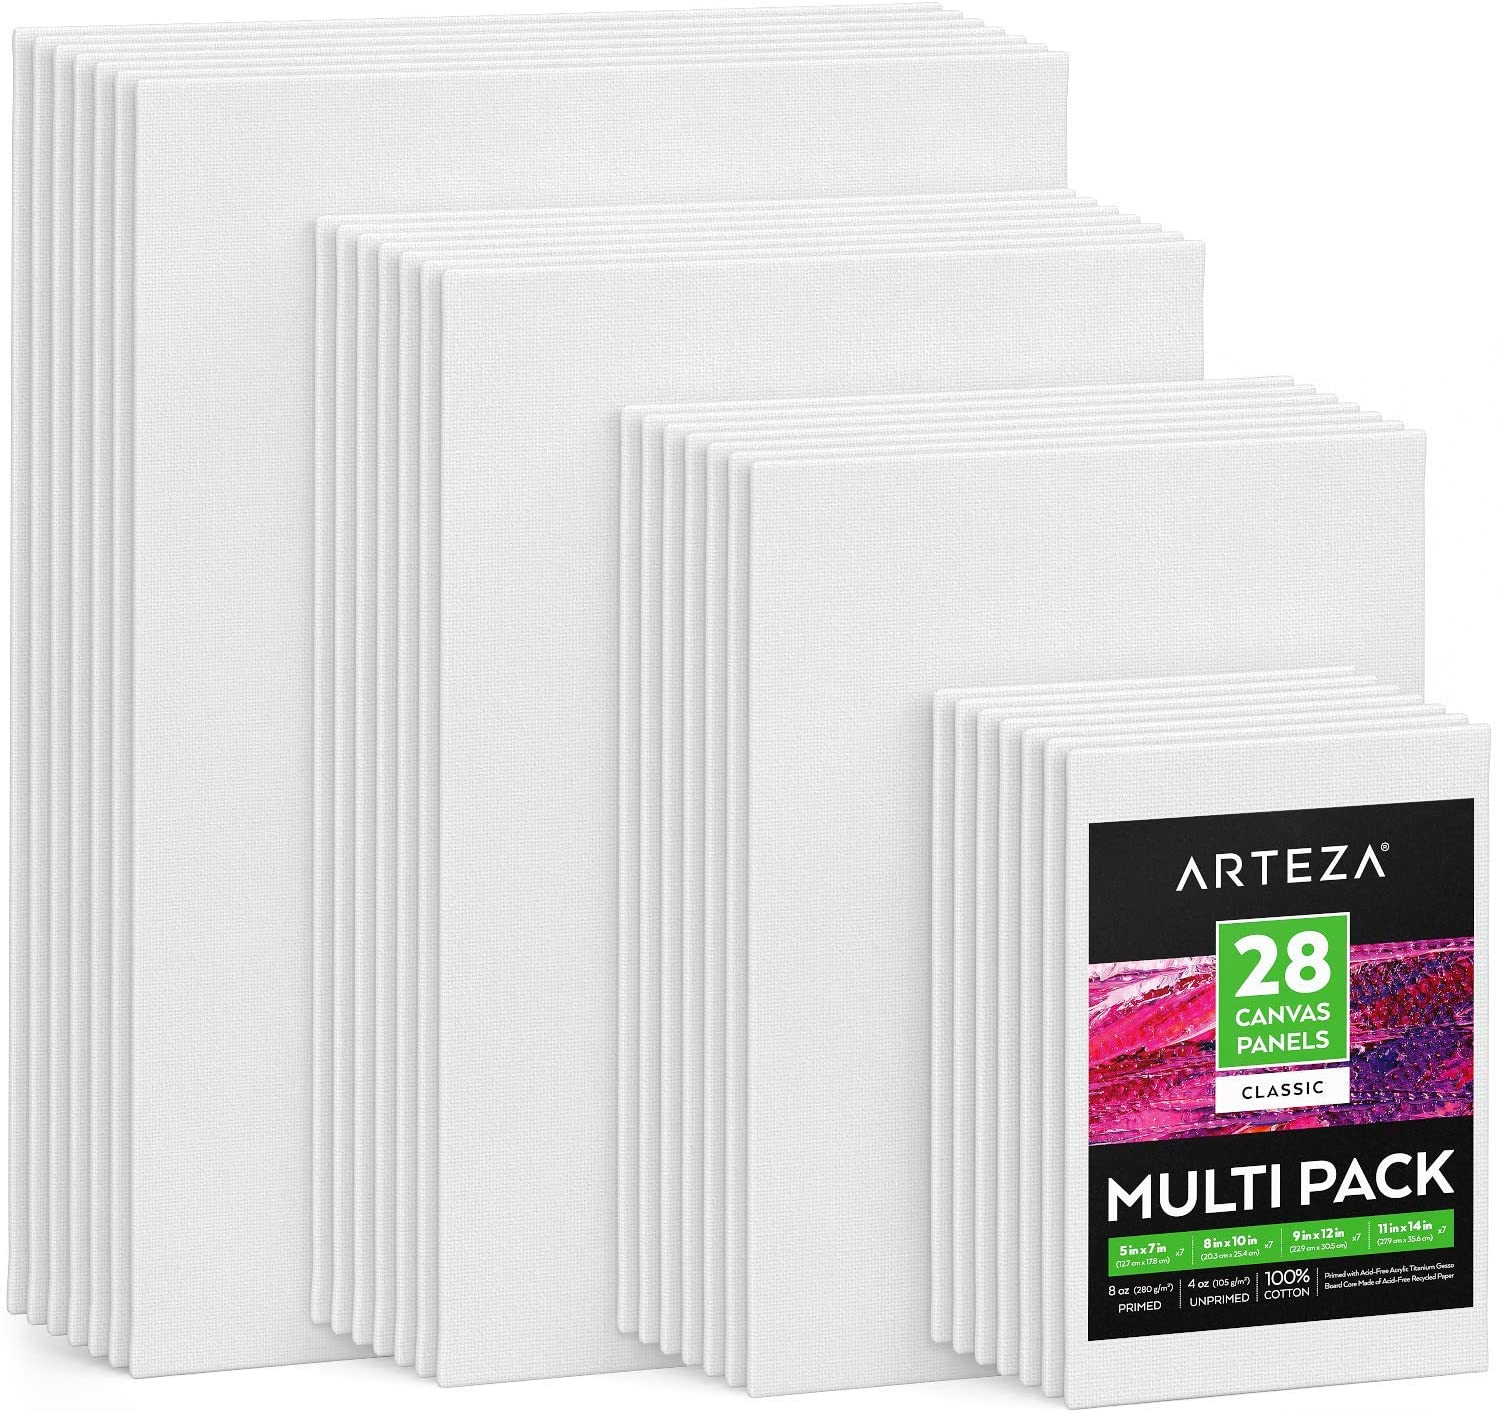 4X4 Inches） Mini Canvas Panels 10 Pack-Artist Stretched Canvas Boards for Painting Craft Drawing Small Acrylics Canvas Oil Projects